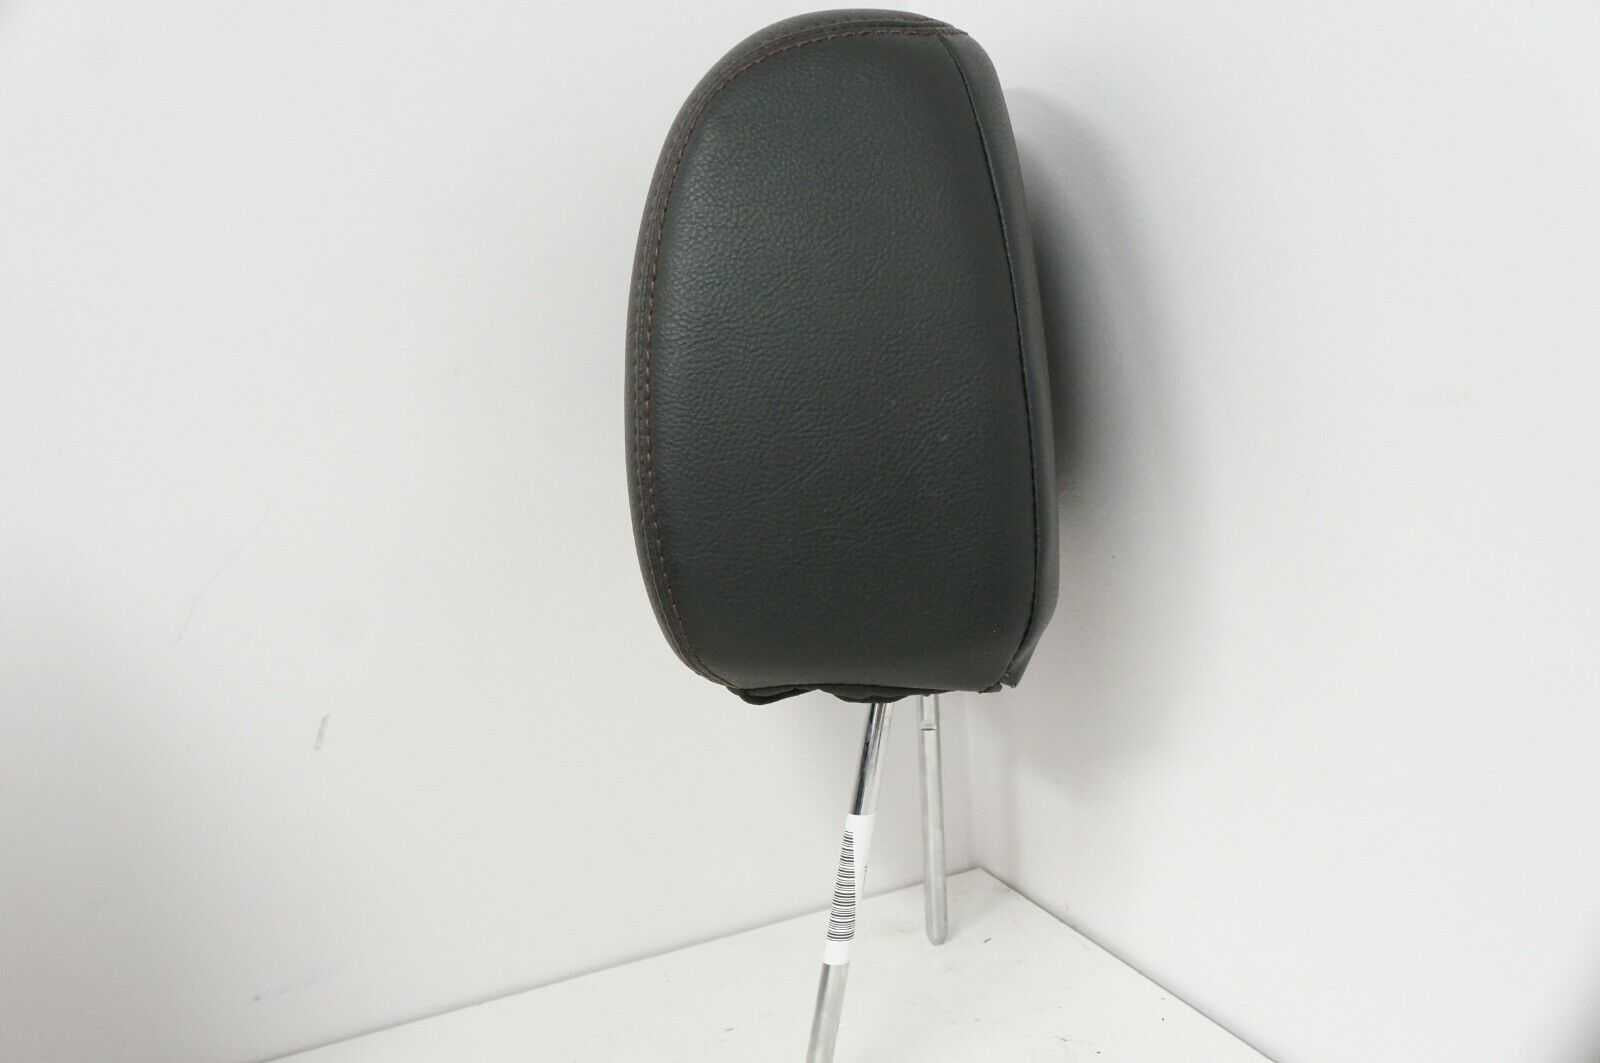 13-14 Ford Edge Front Left Right Side Headrest Black CT4Z-78611A08-A OEM VA2035 Alshned Auto Parts